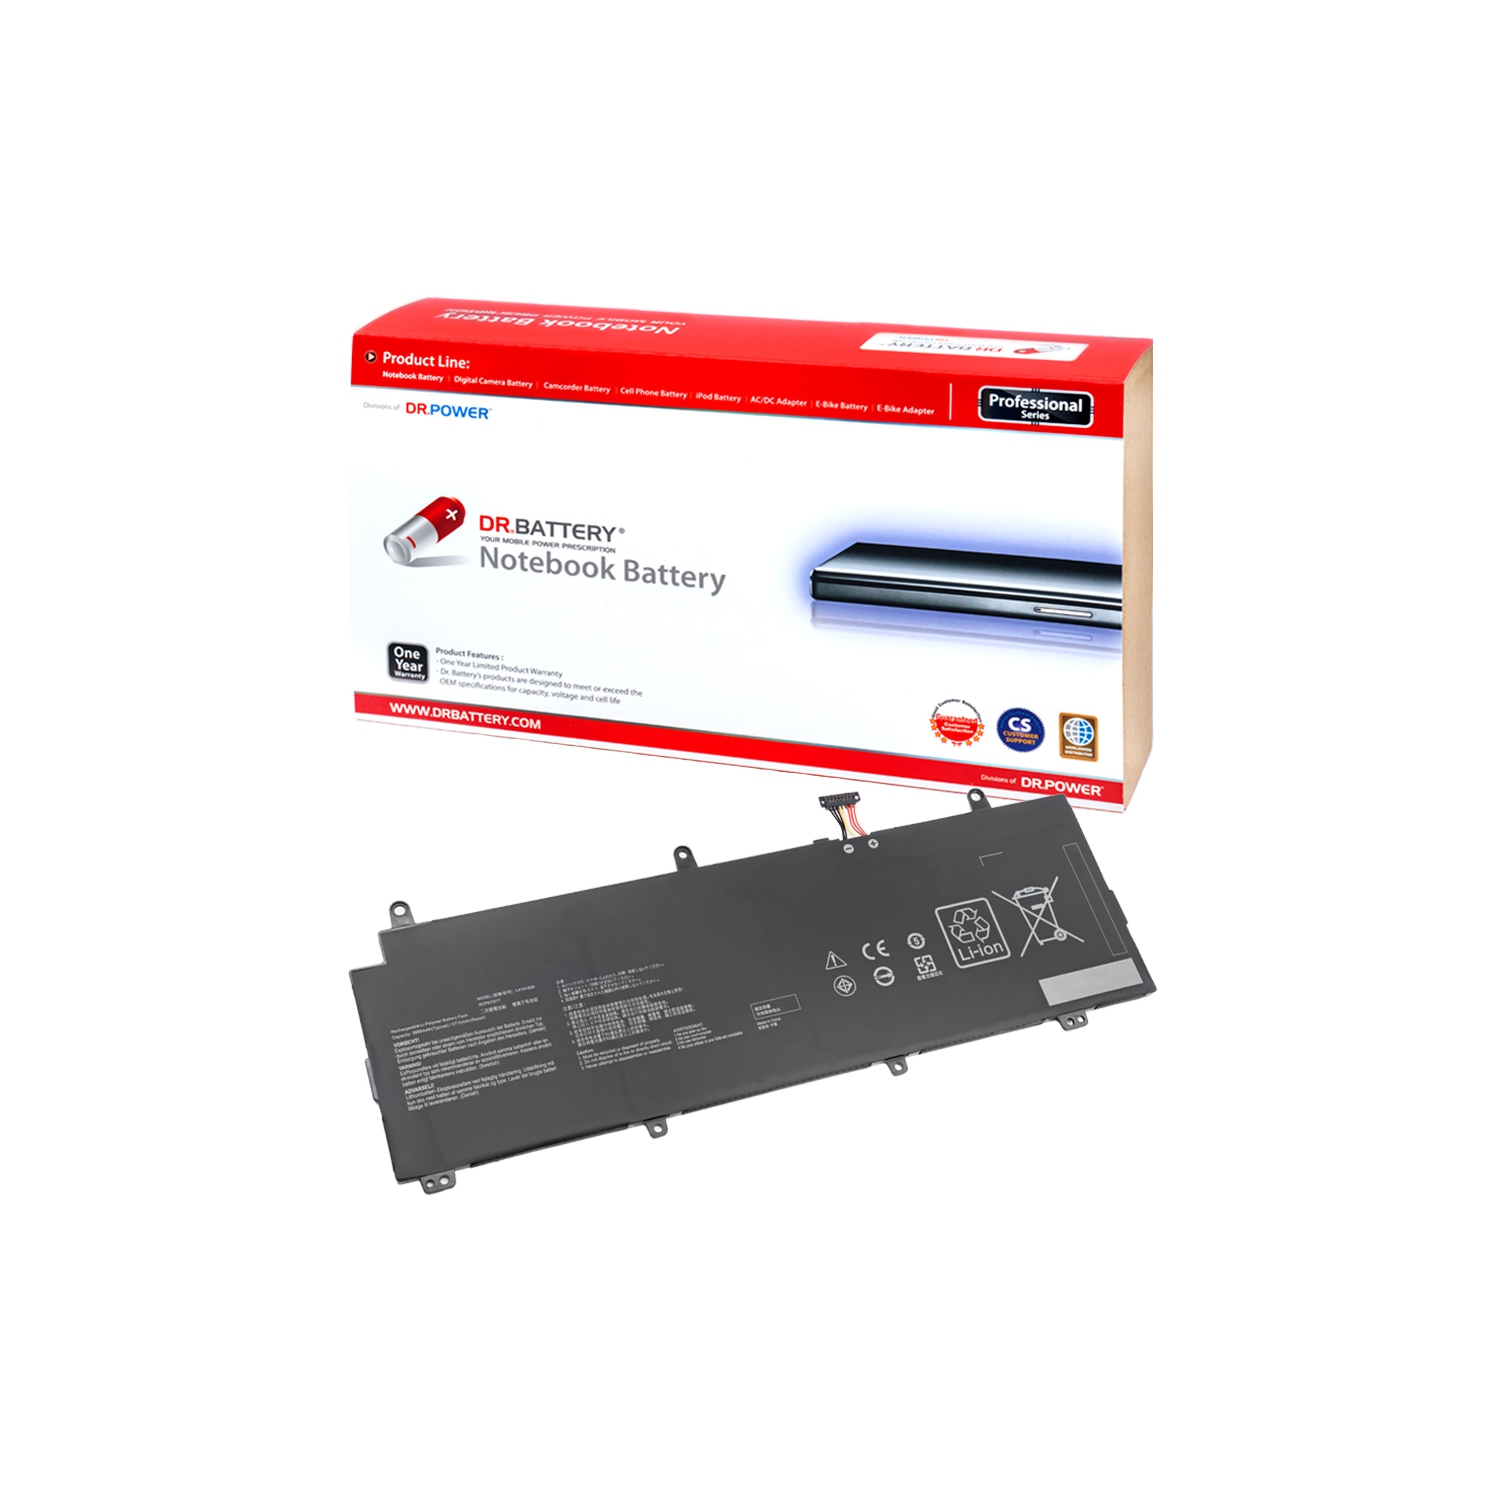 DR. BATTERY - Replacement for Asus ROG Zephyrus S GX531GV-ES003T / GX531GV-ES007T / GX531GV-ES017T / 72 / 77 / 0B200-03020200 [15.44V / 3886mAh / 60Wh] *** Free Shipping***